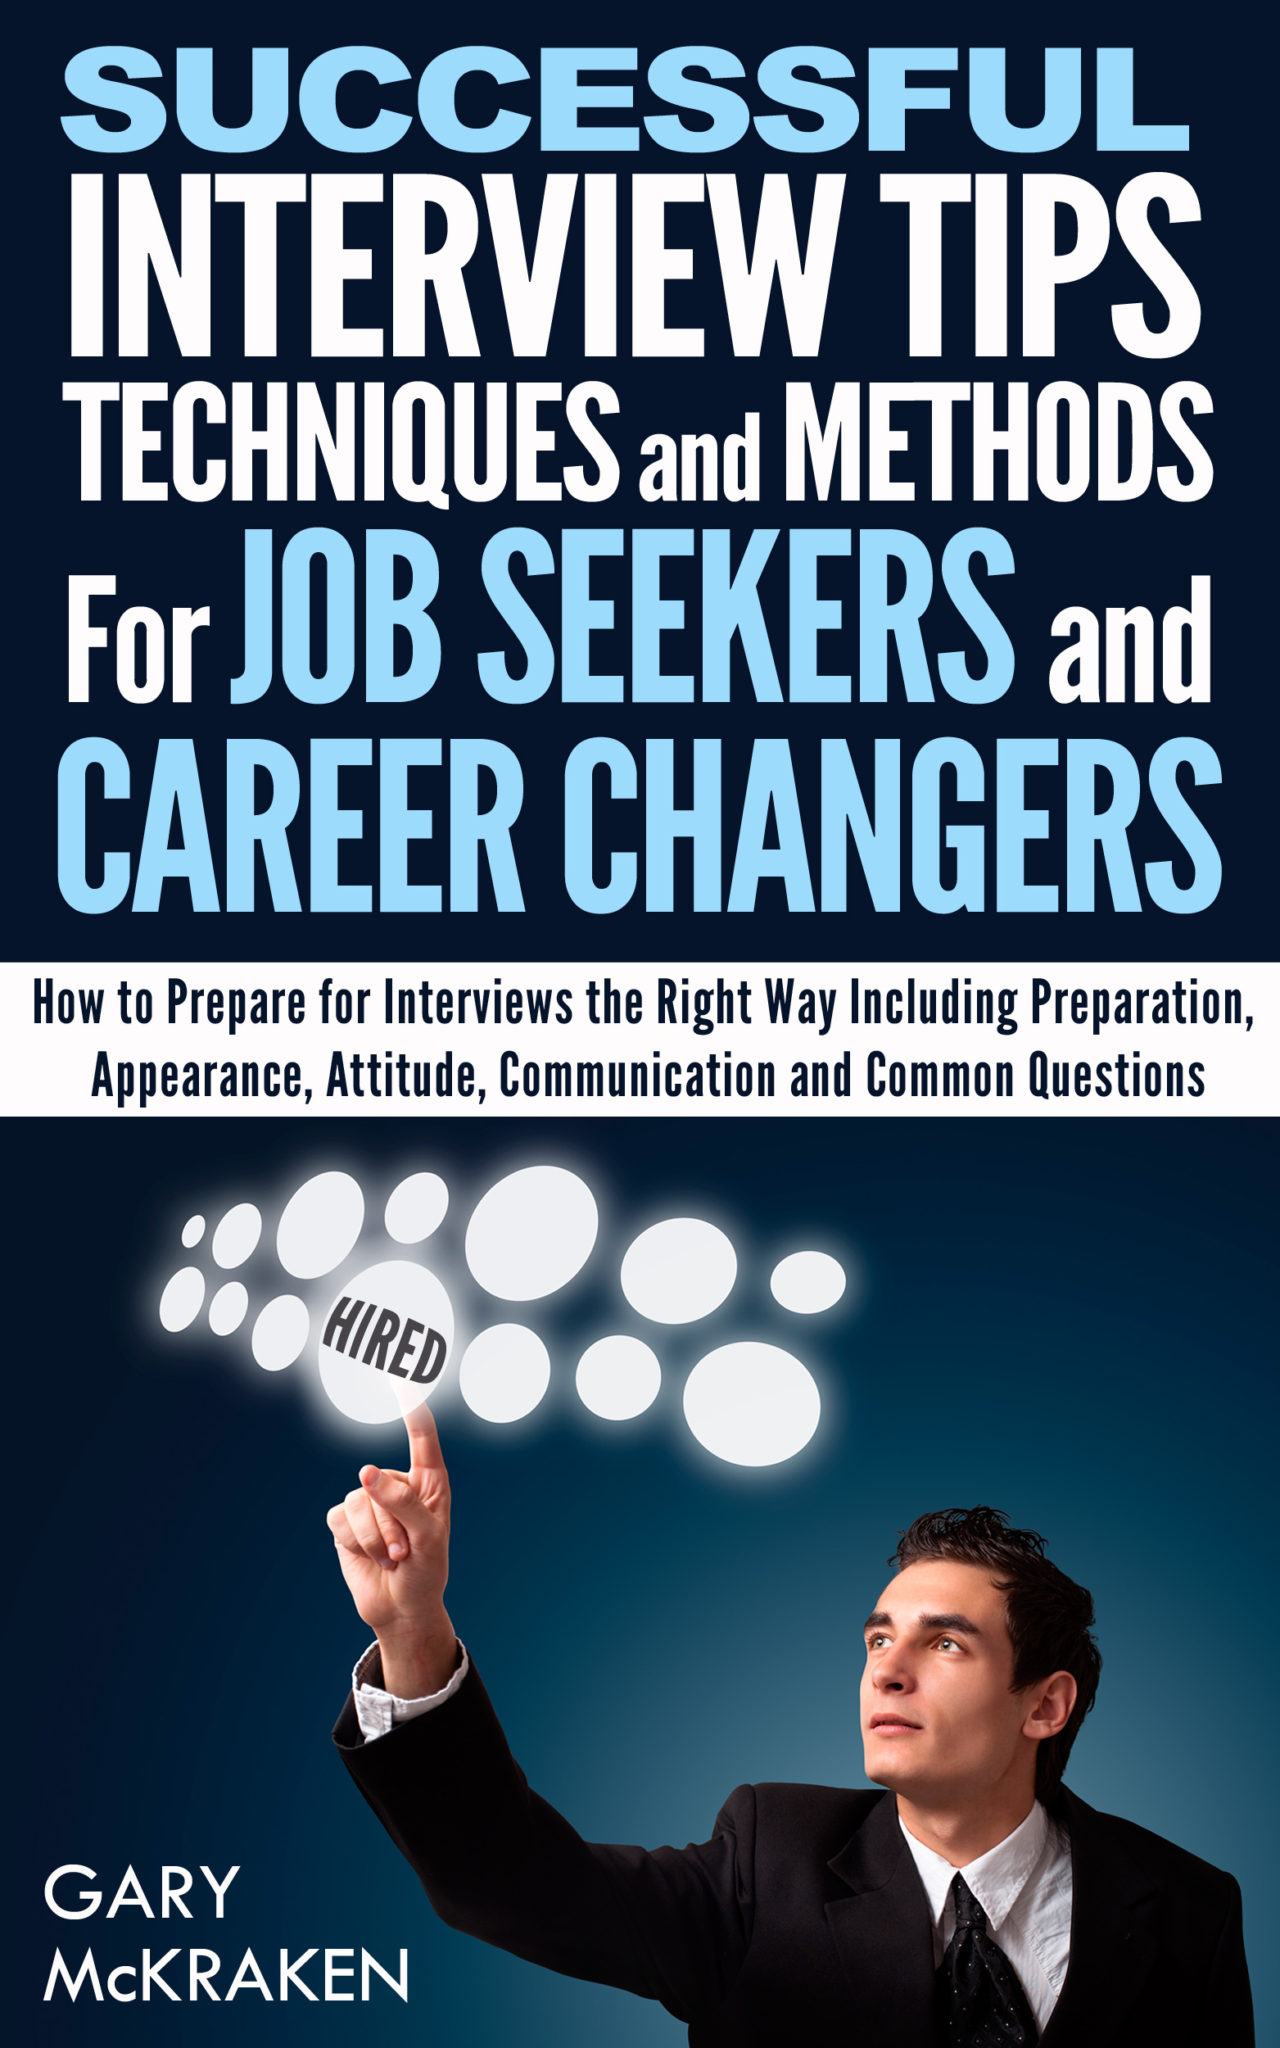 FREE: Successful Interview Tips, Techniques and Methods by Gary McKraken